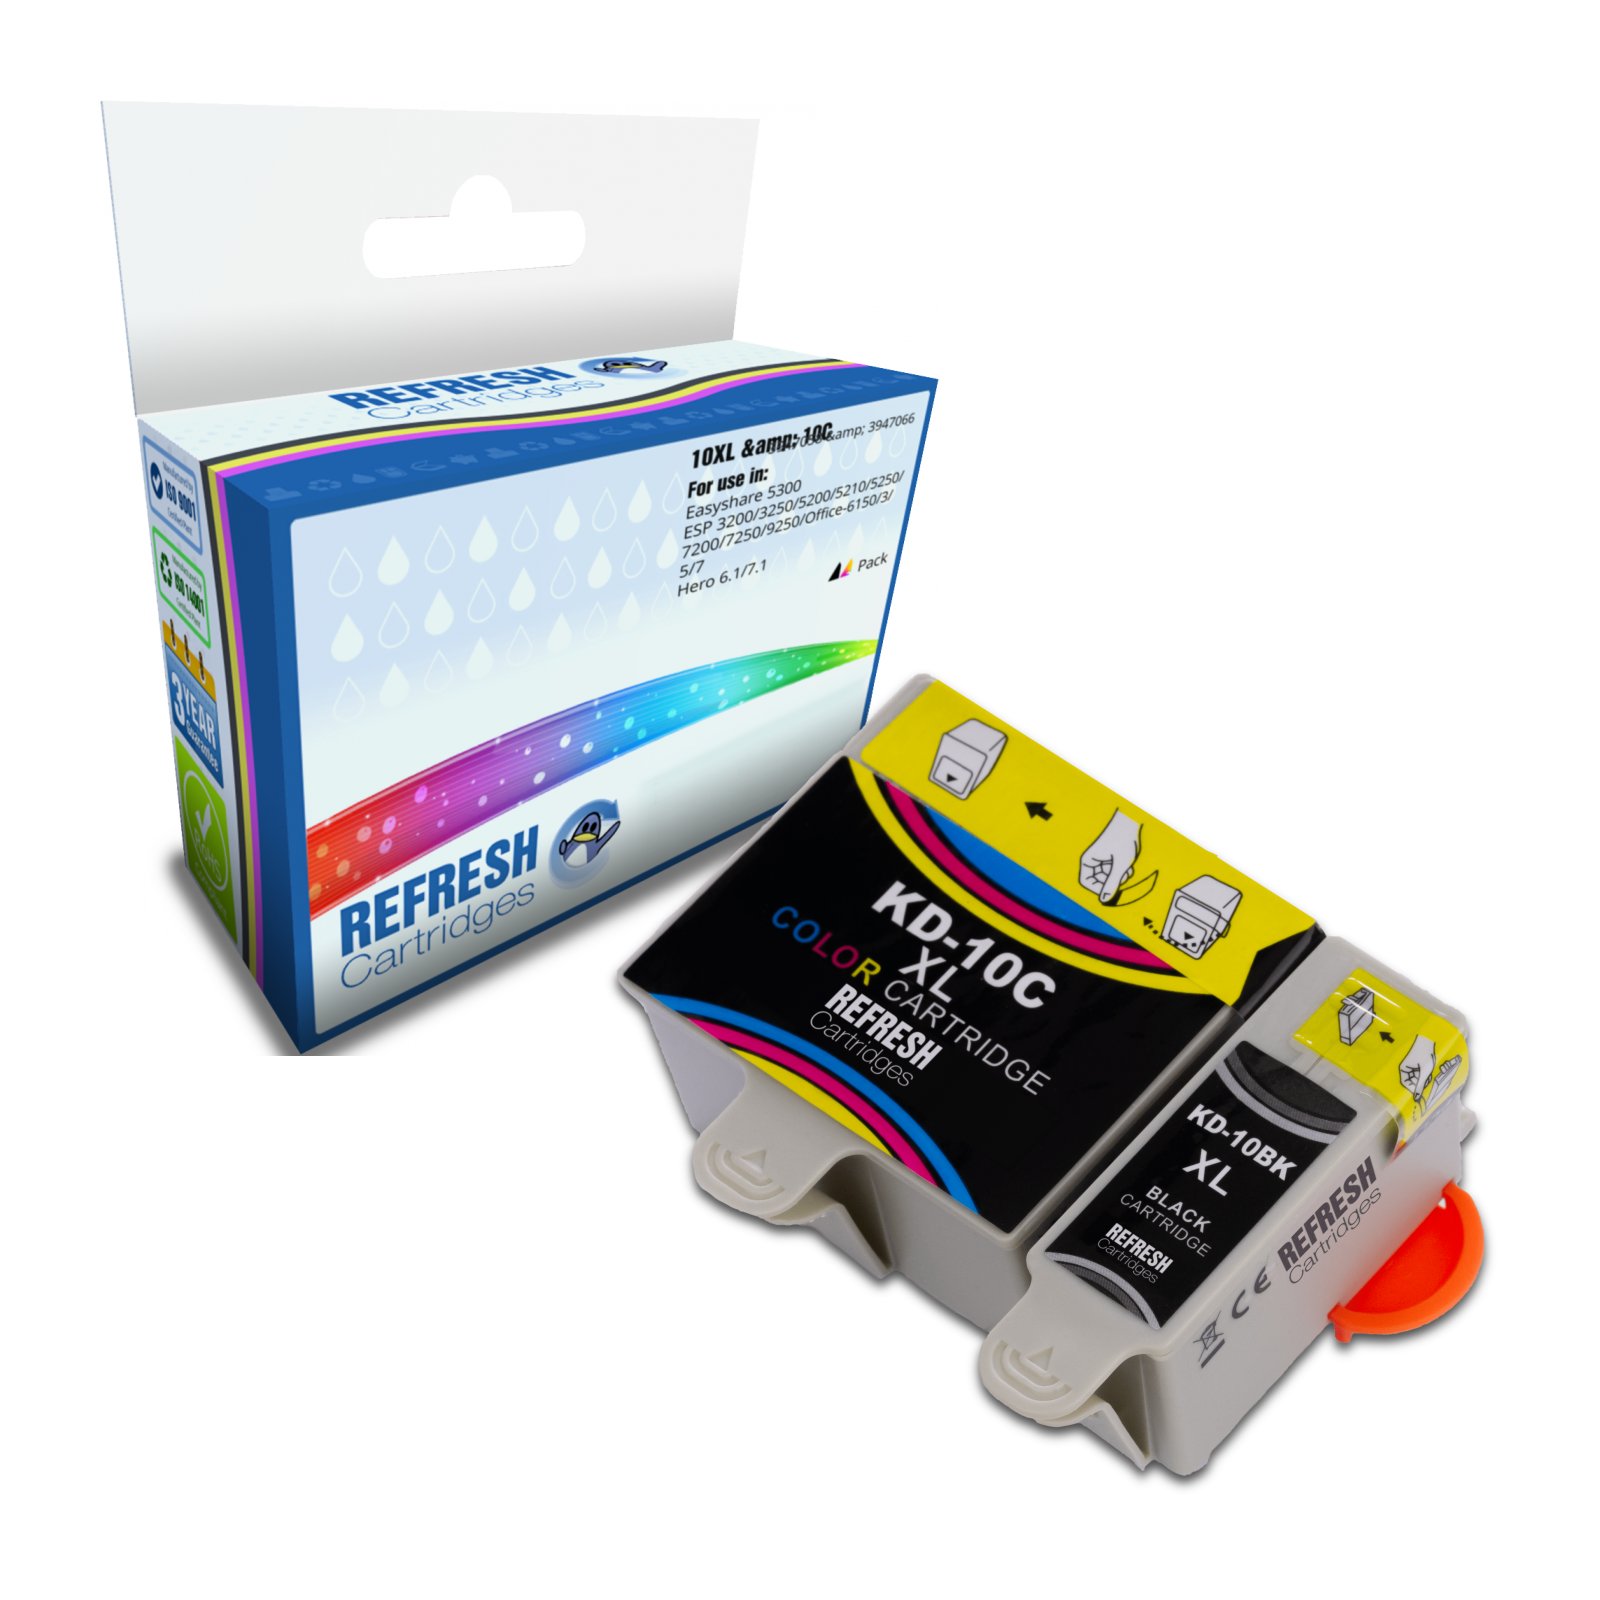 Compatible Basic Valuepack of 10XL & 10C (3947058 & 3947066) Replacement Ink Cartridges for Kodak Printers